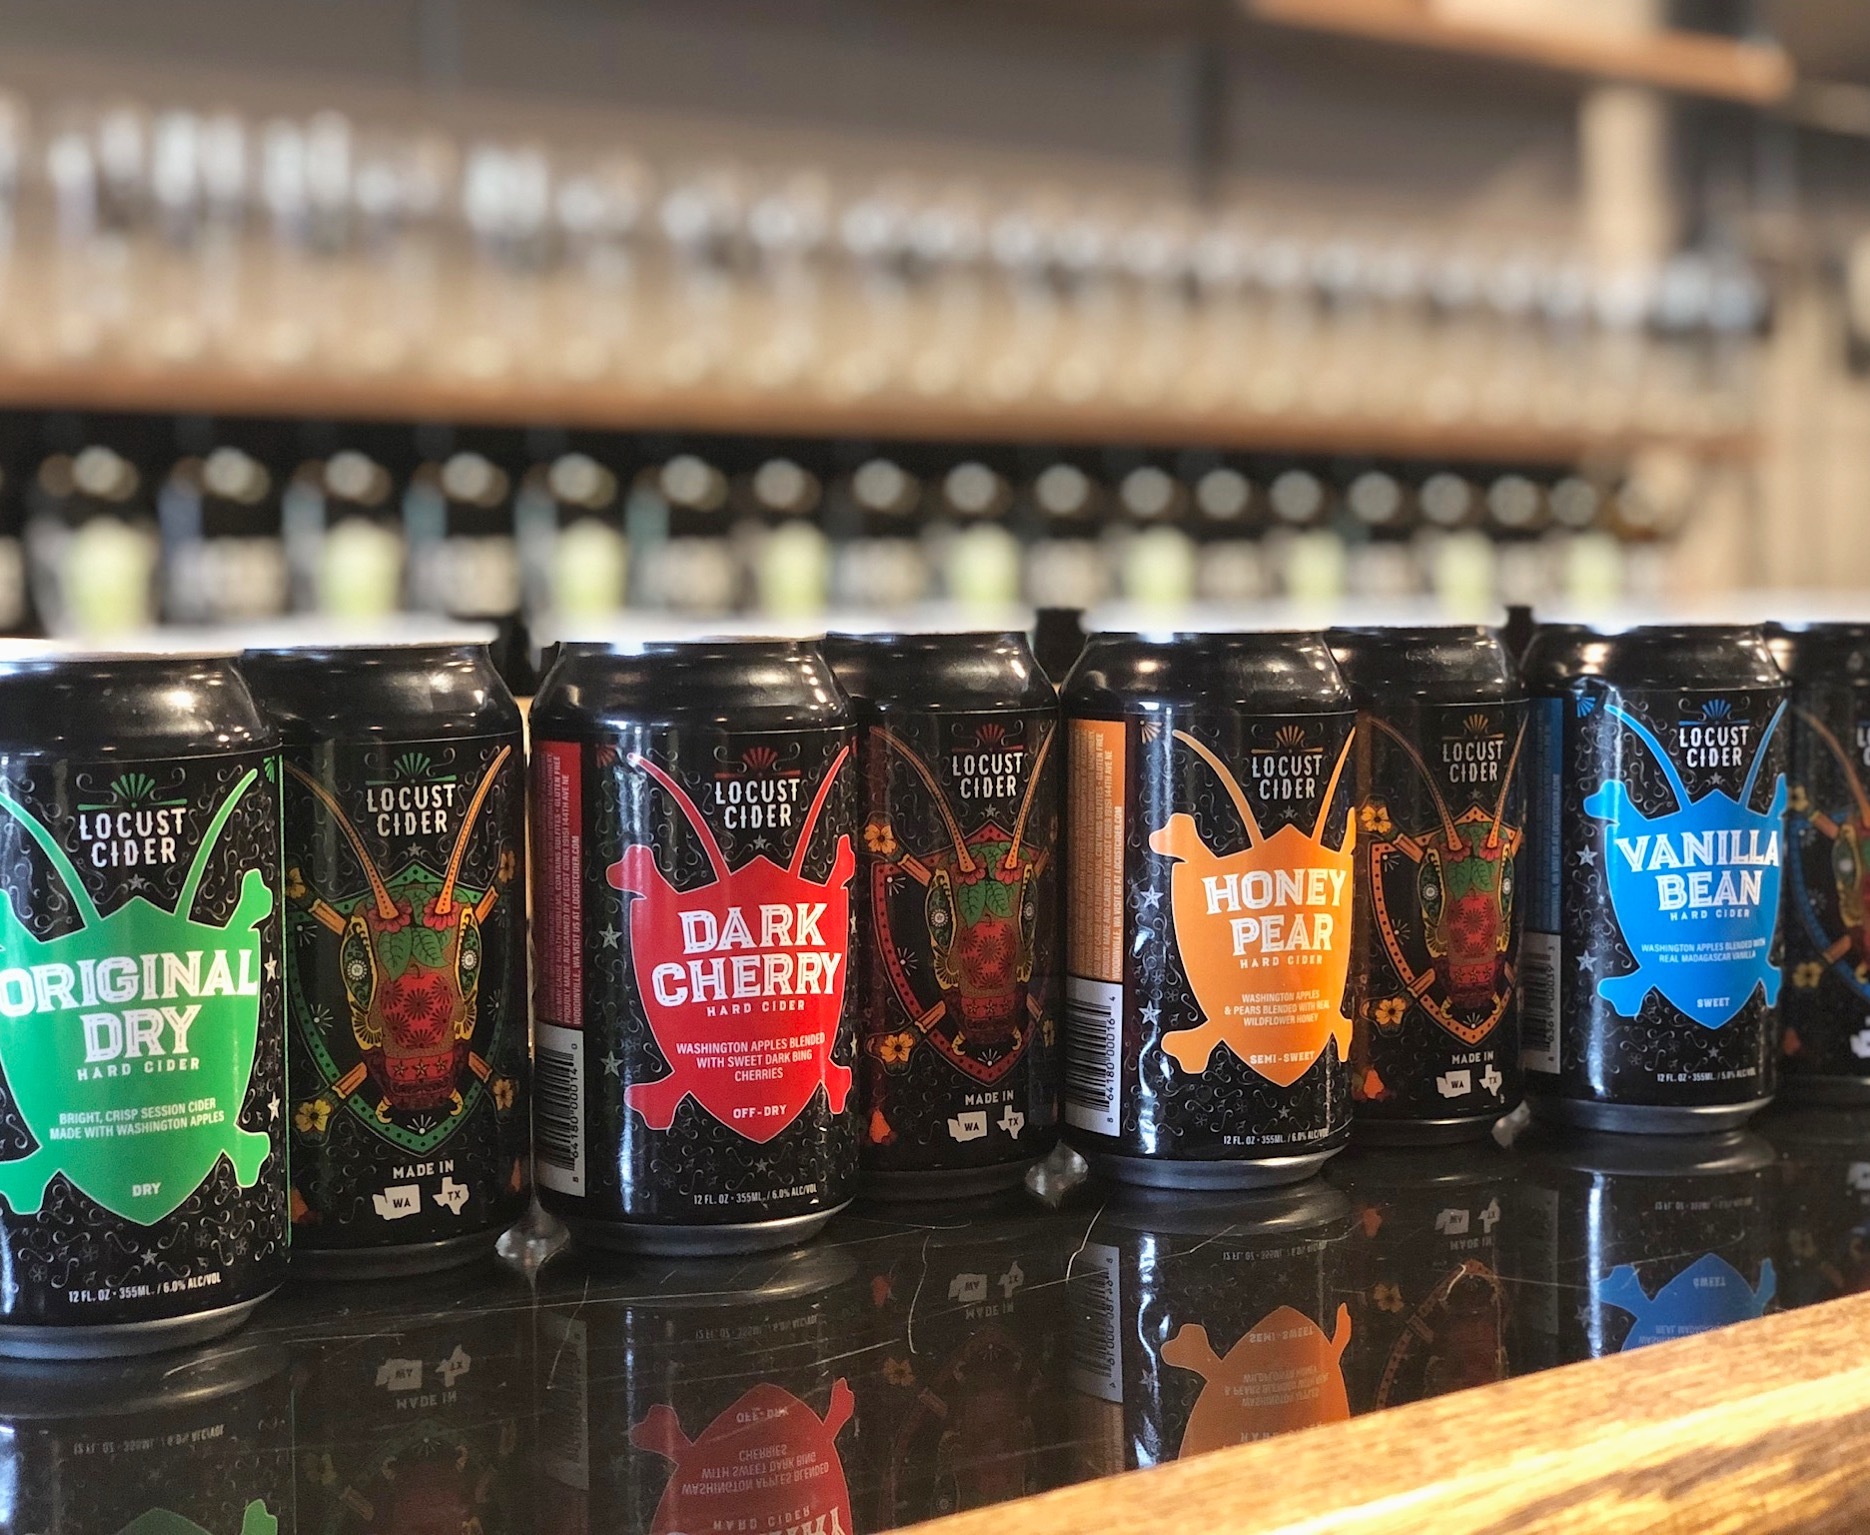 A line of Locust Cider cans sitting on a bar